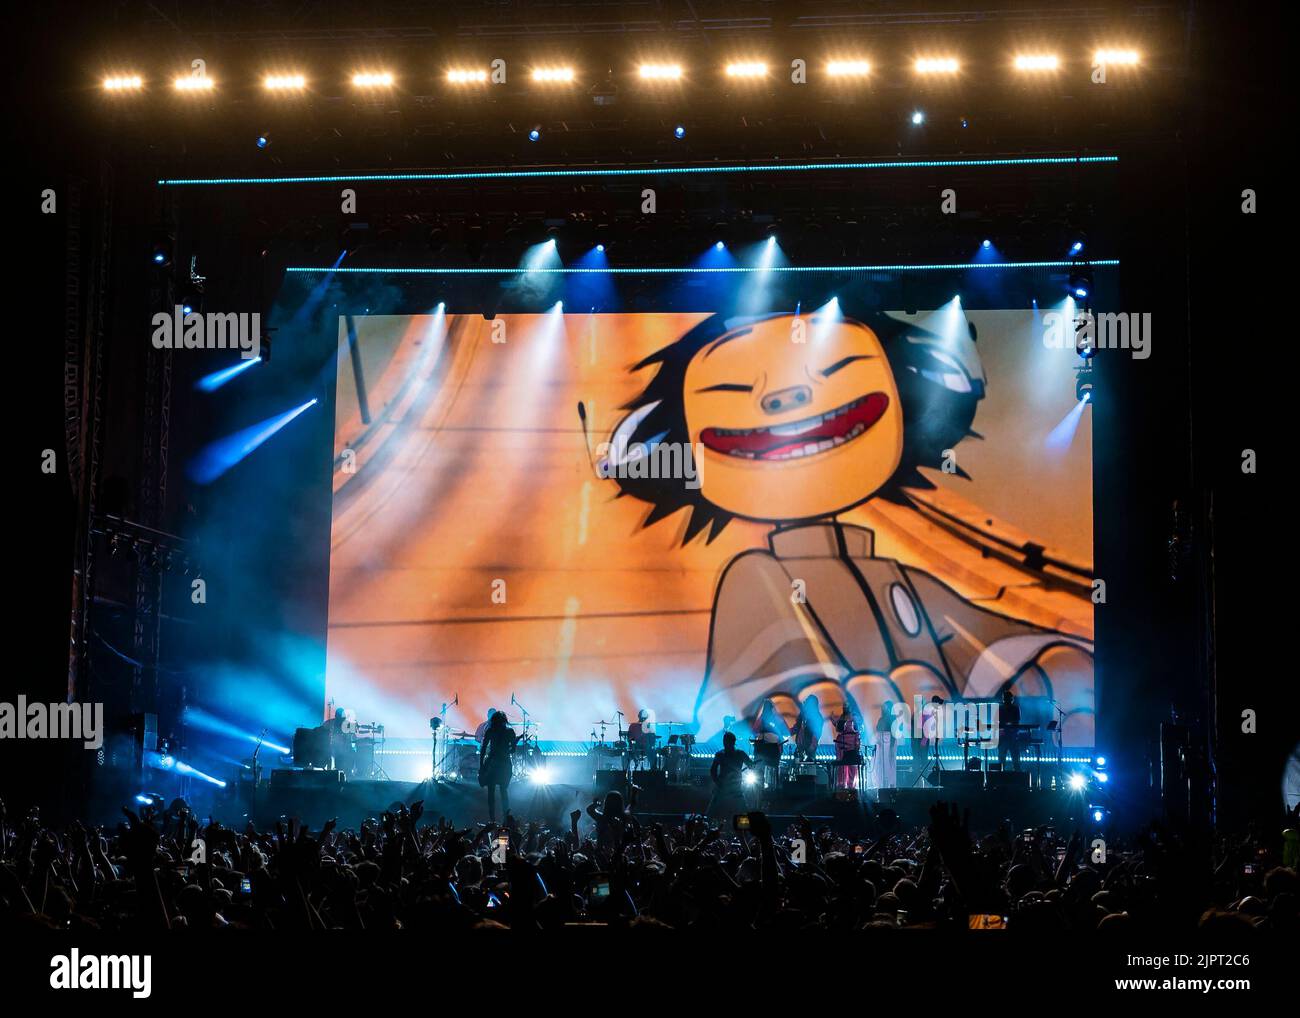 London, UK, Friday, 19th August 2022. Gorillaz perform live on stage as part of the All Points East Festival, Victoria Park, London.  Credit: DavidJensen / Empics Entertainment / Alamy Live News Stock Photo